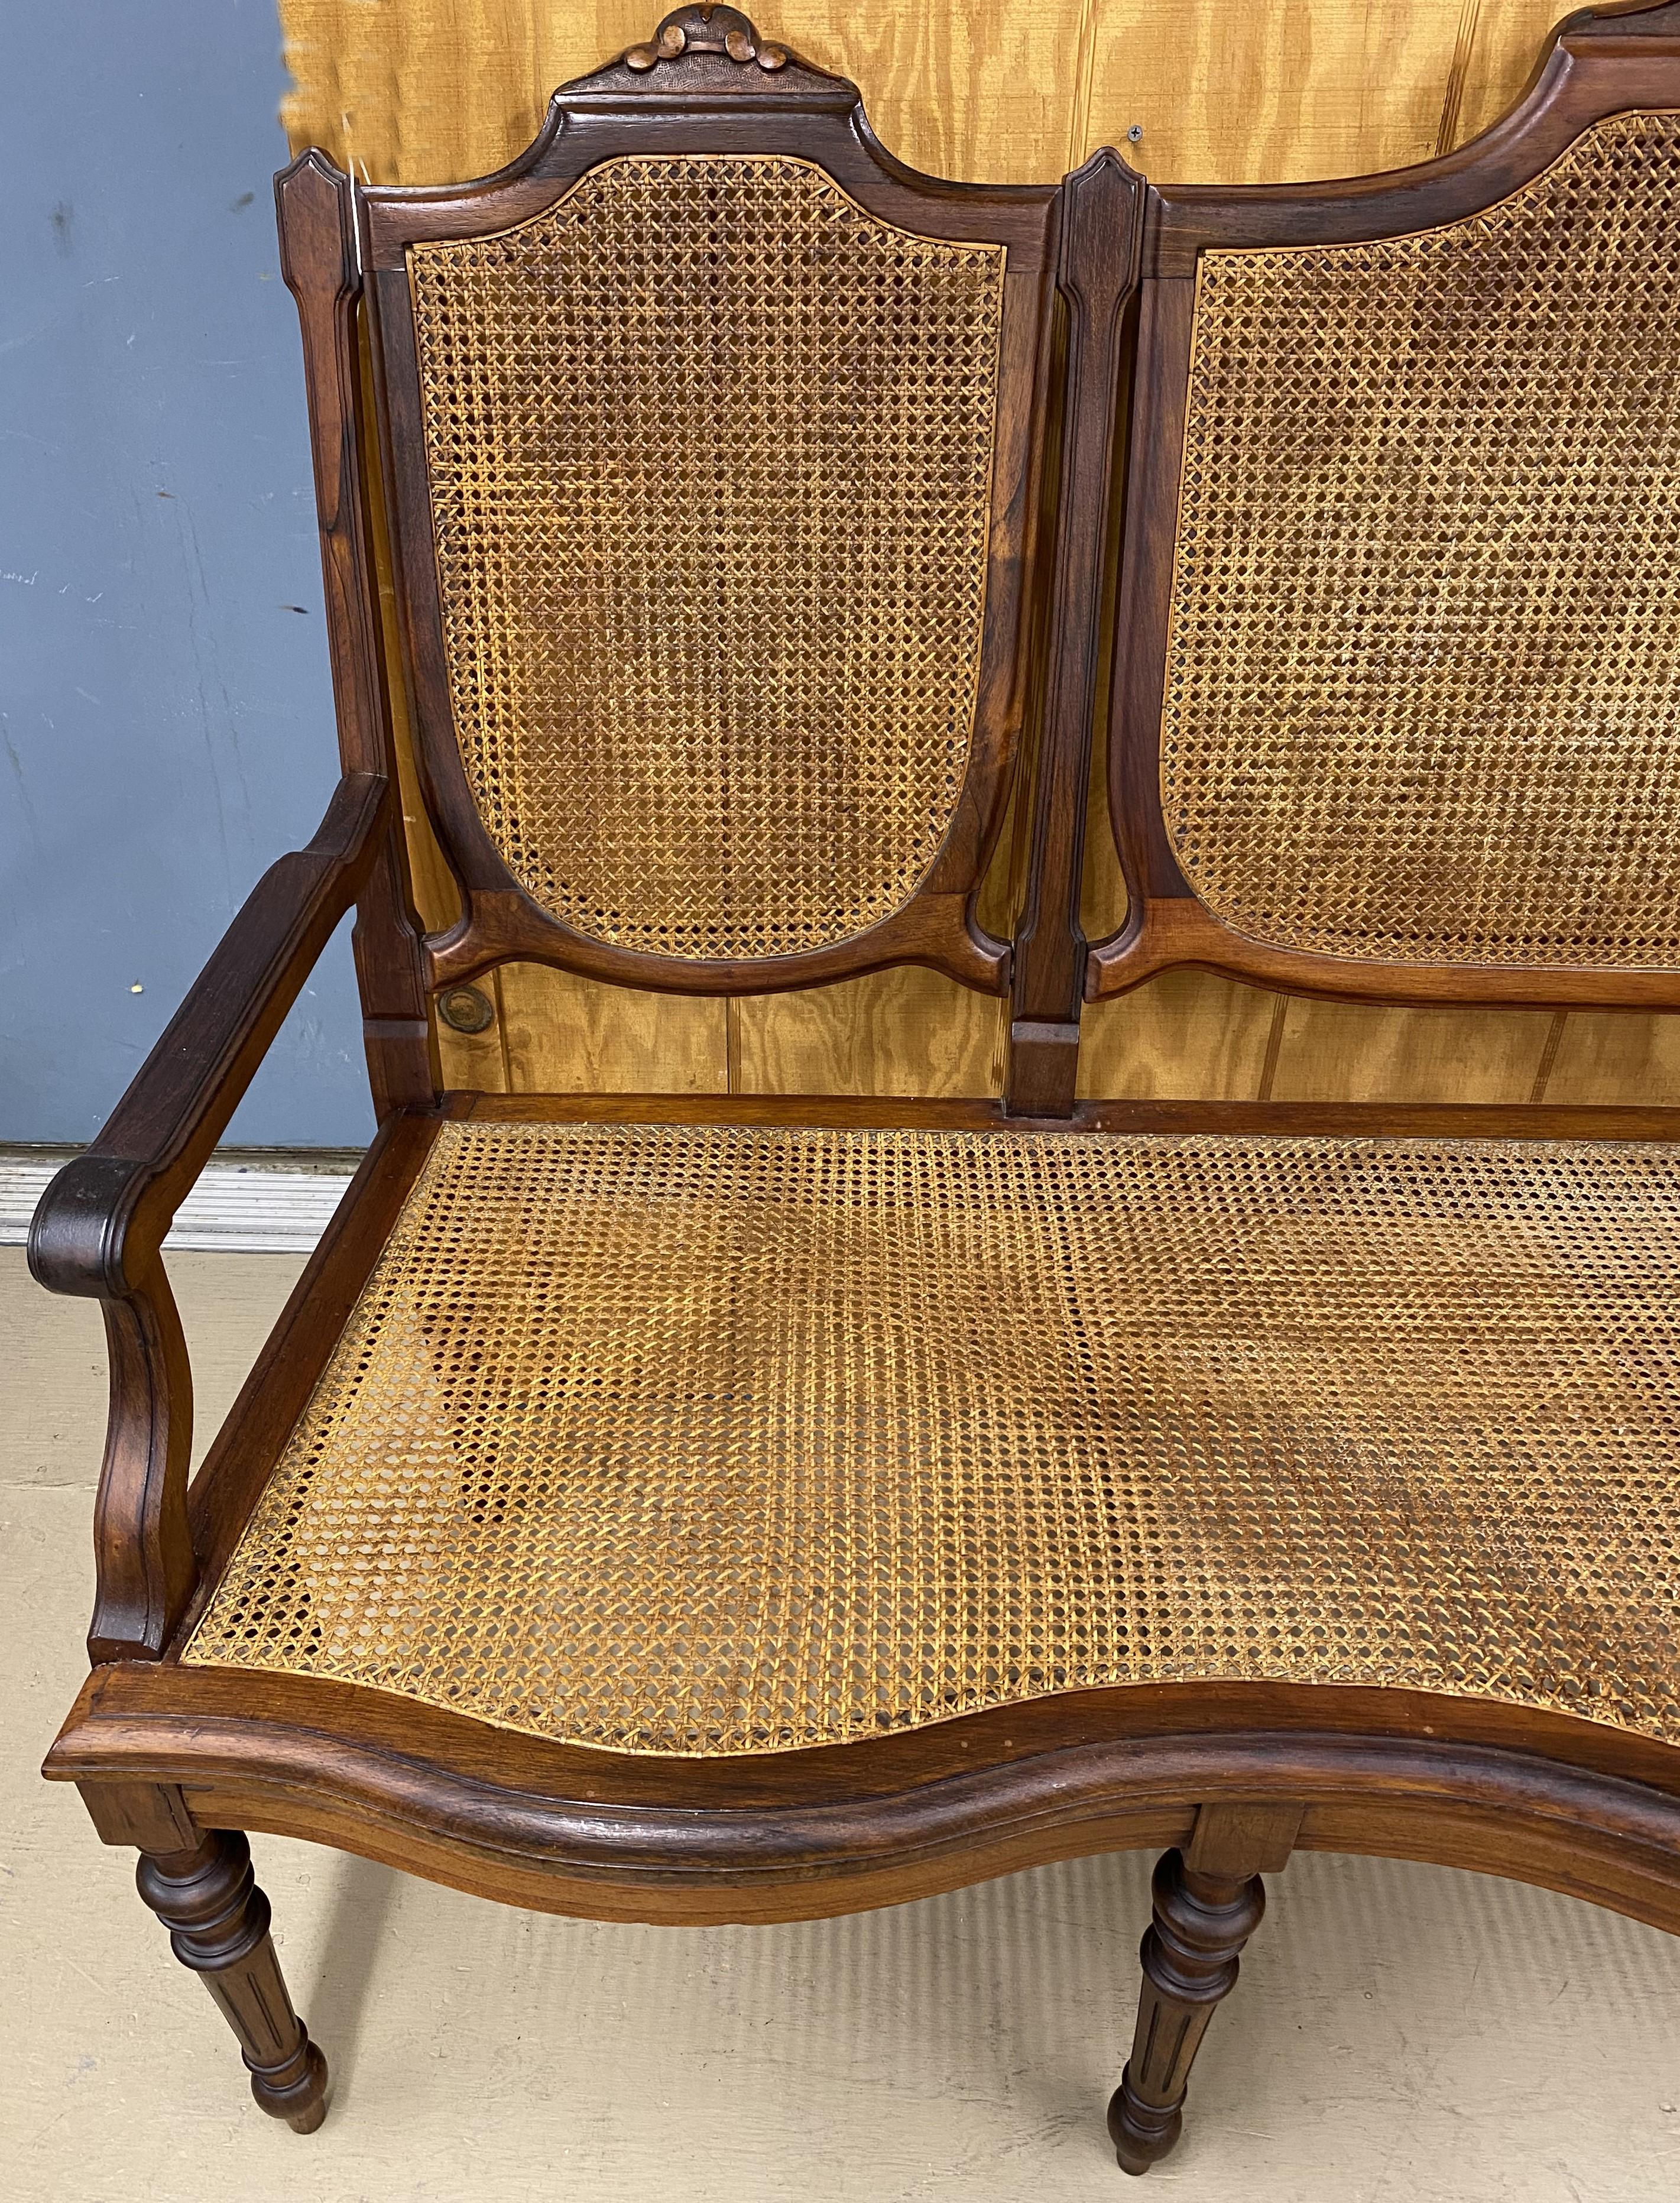 A nice example of a Brazilian hardwood settee, possibly jacaranda, with caned seat and back, carved crests, shaped seat rail, and tapered round turned and reeded legs. From the late 19th / early 20th century, in very good overall condition, with